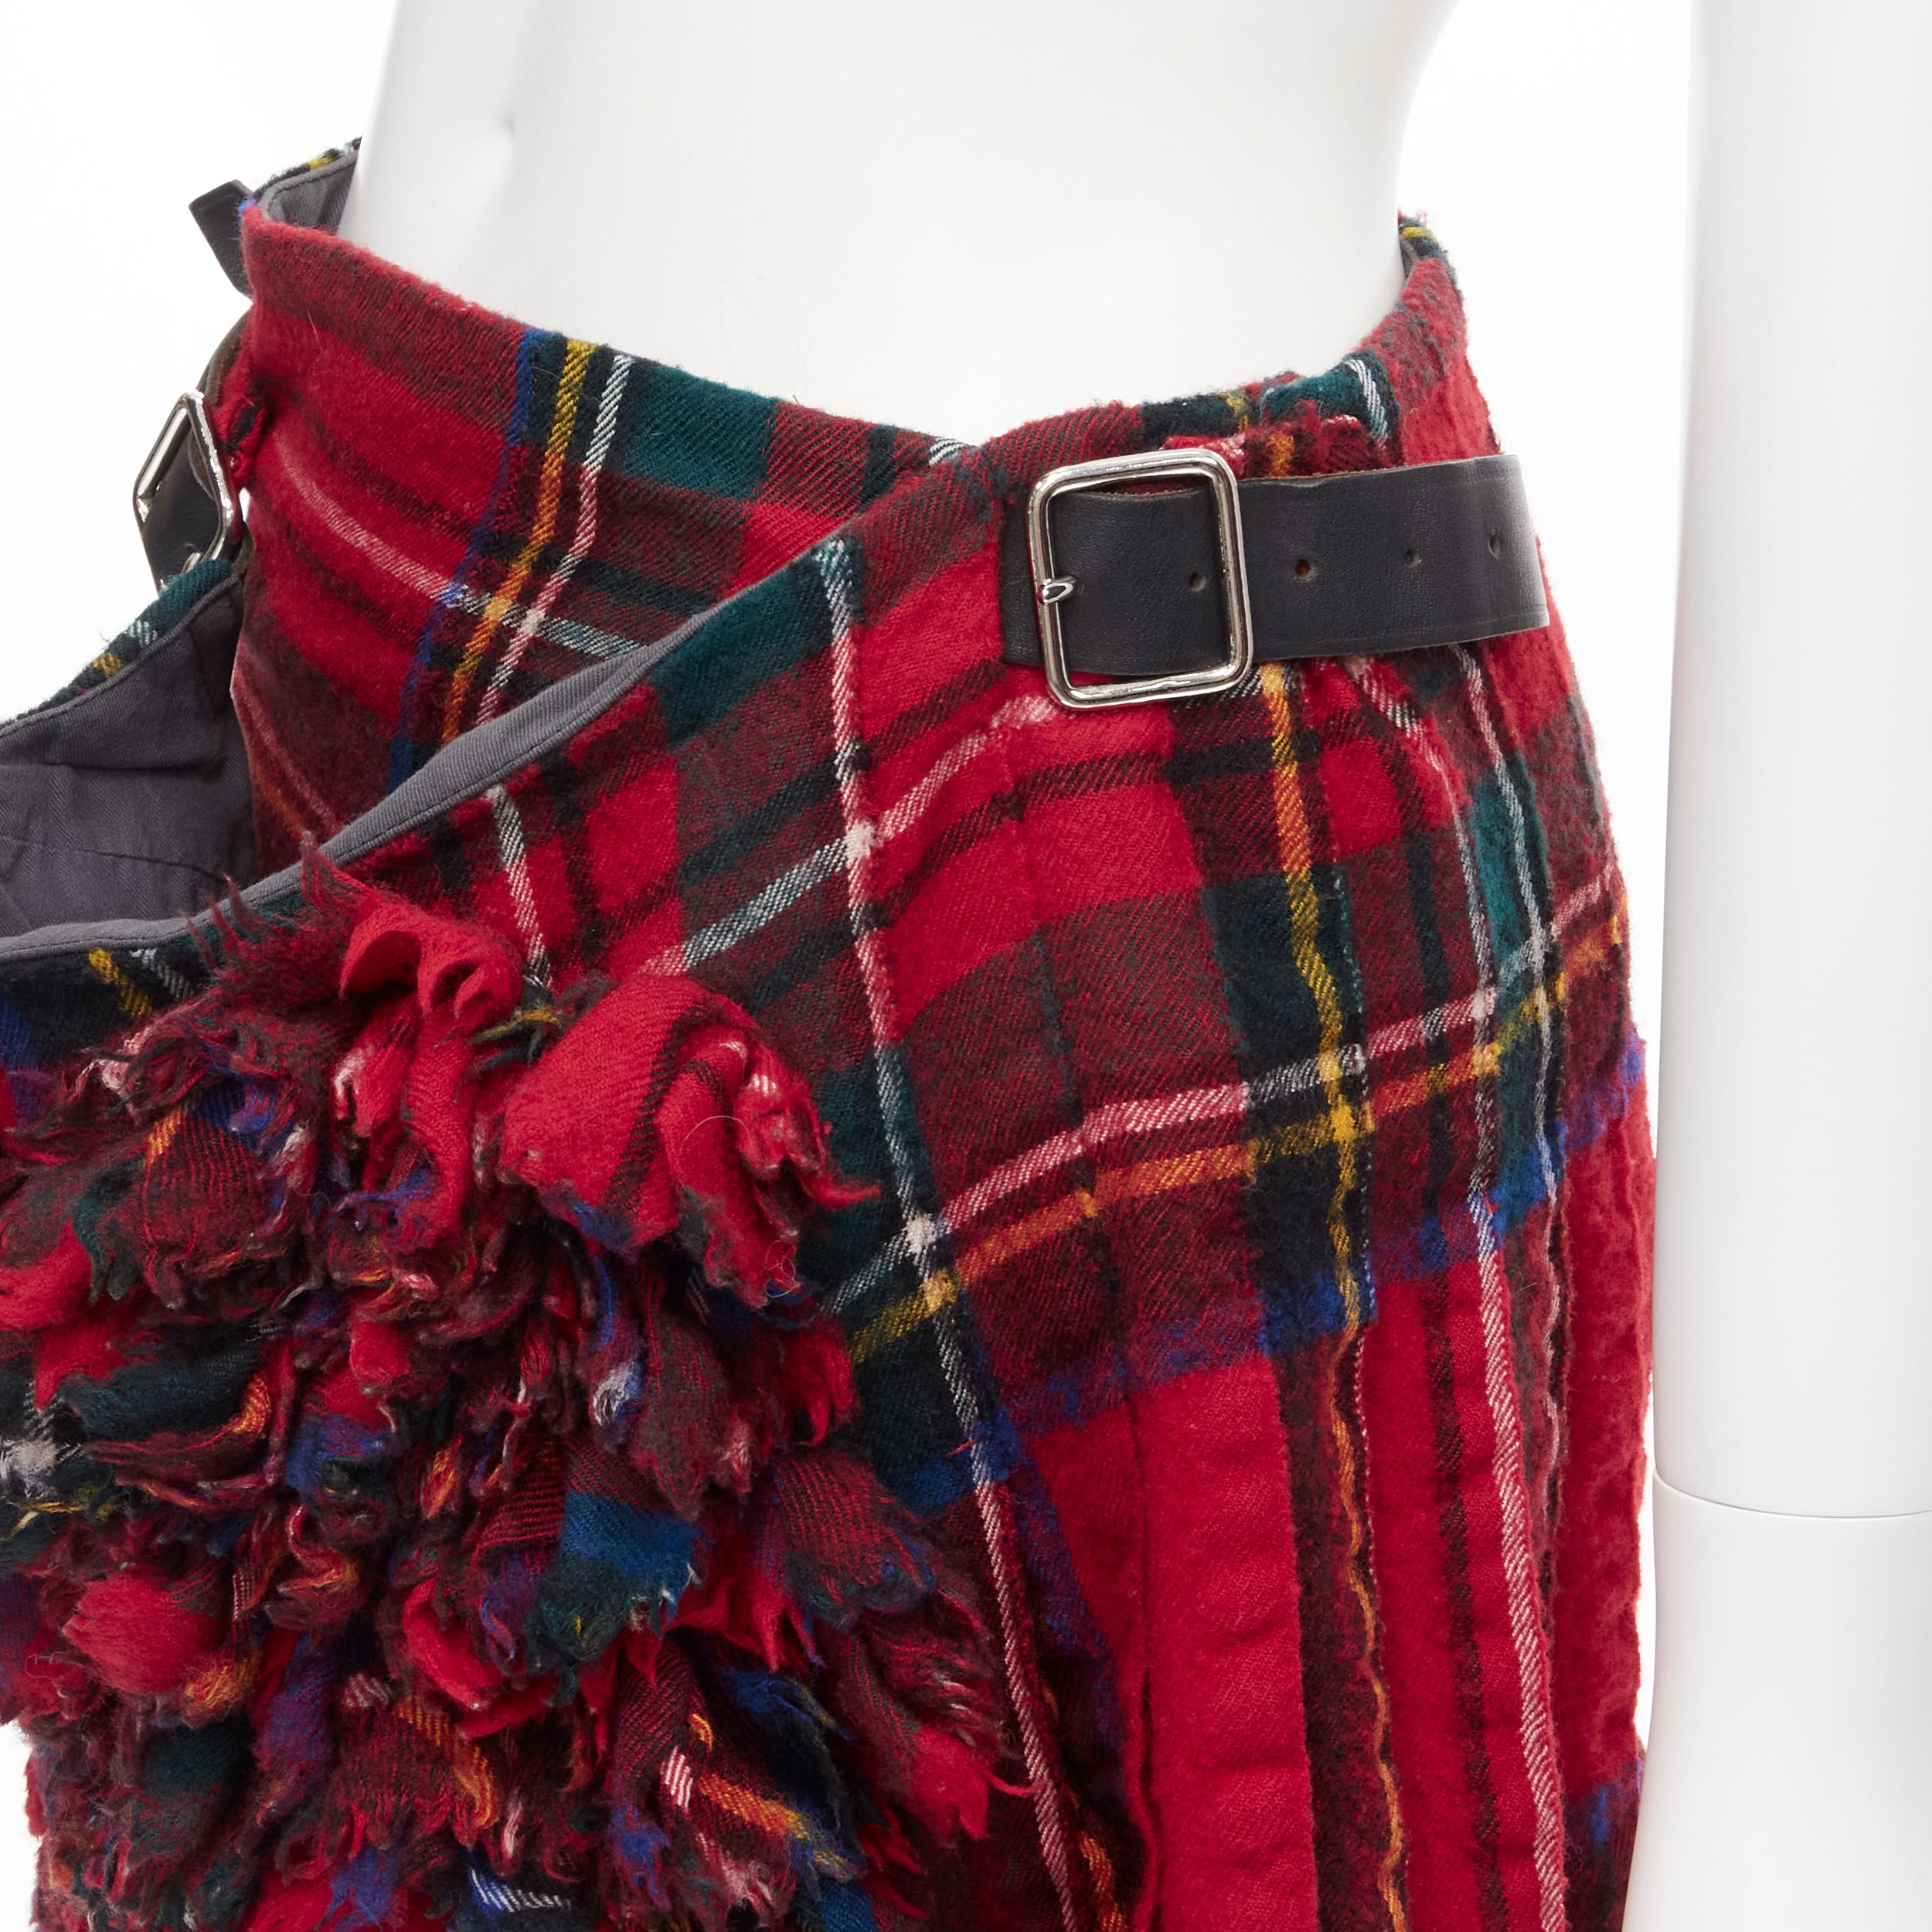 COMME DES GARCONS 2000 red plaid tartan check ruffle draped wrap skirt kilt S 
Reference: CRTI/A00435 
Brand: Comme Des Garcons 
Designer: Rei Kawakubo 
Collection: 2000 
Material: Wool 
Color: Red 
Pattern: Check 
Closure: Buckle Extra Detail: